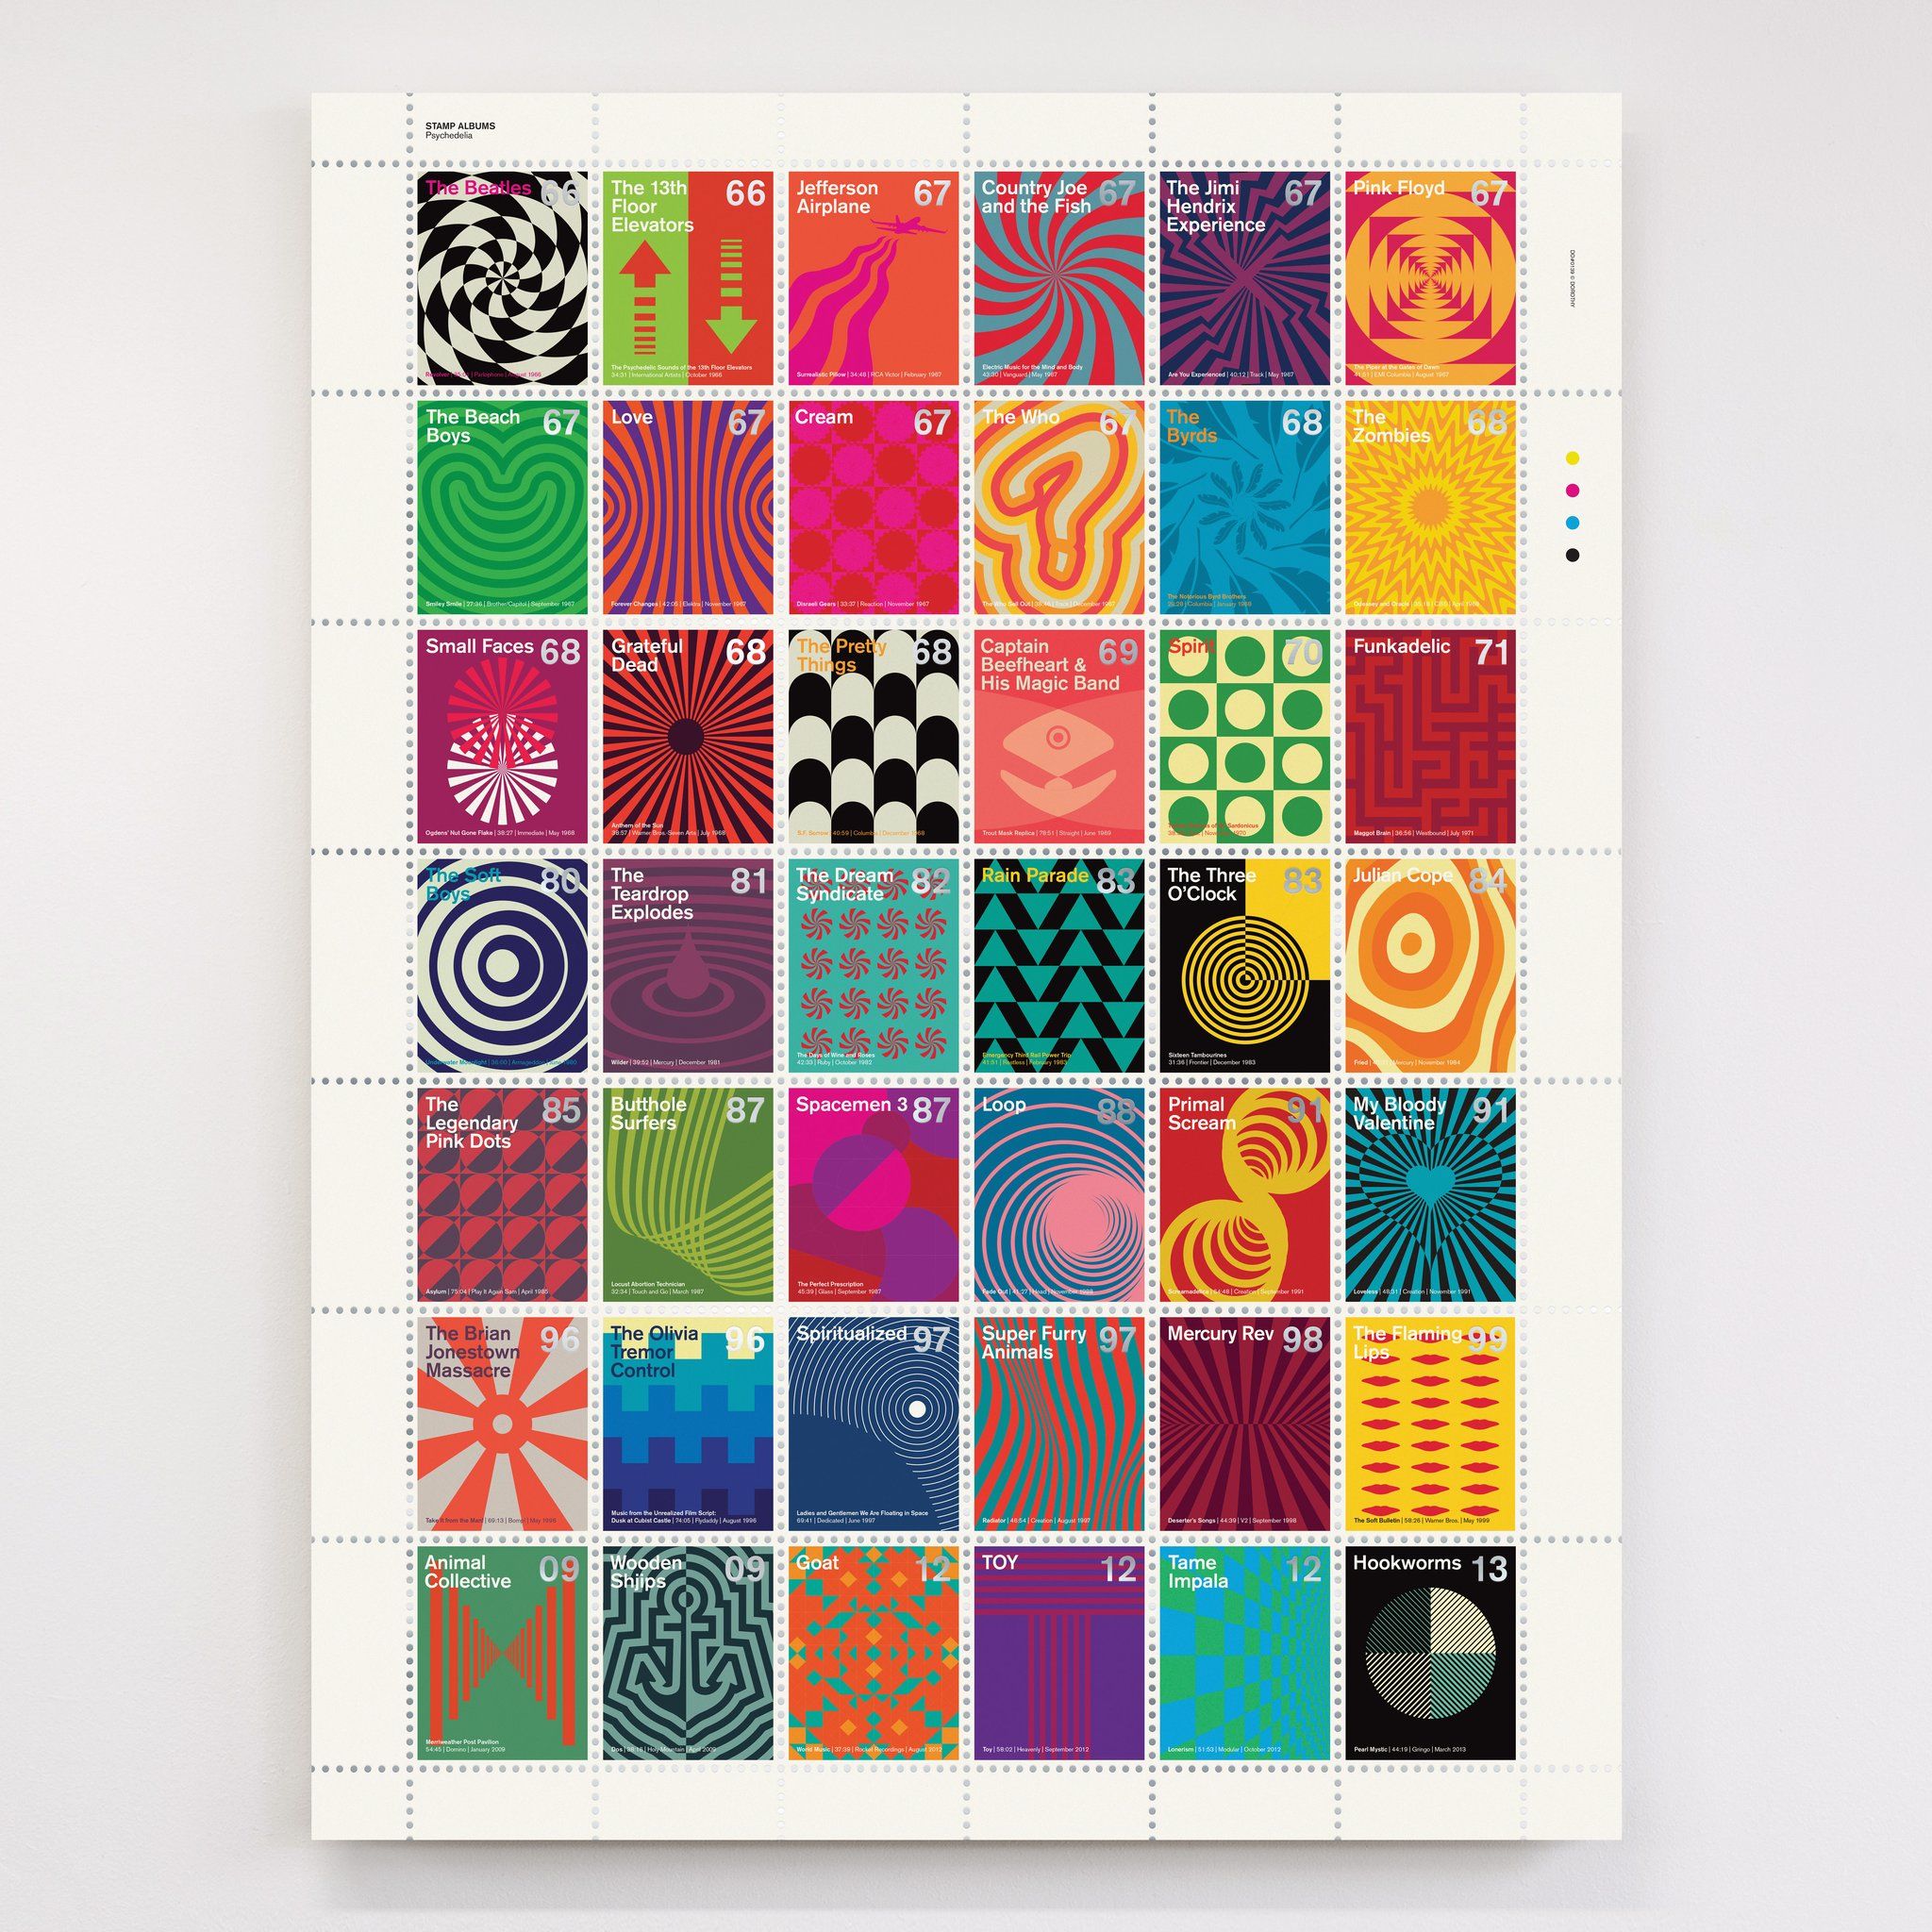 Dorothy - Stamp Albums: Psychedelic Litho Print Poster